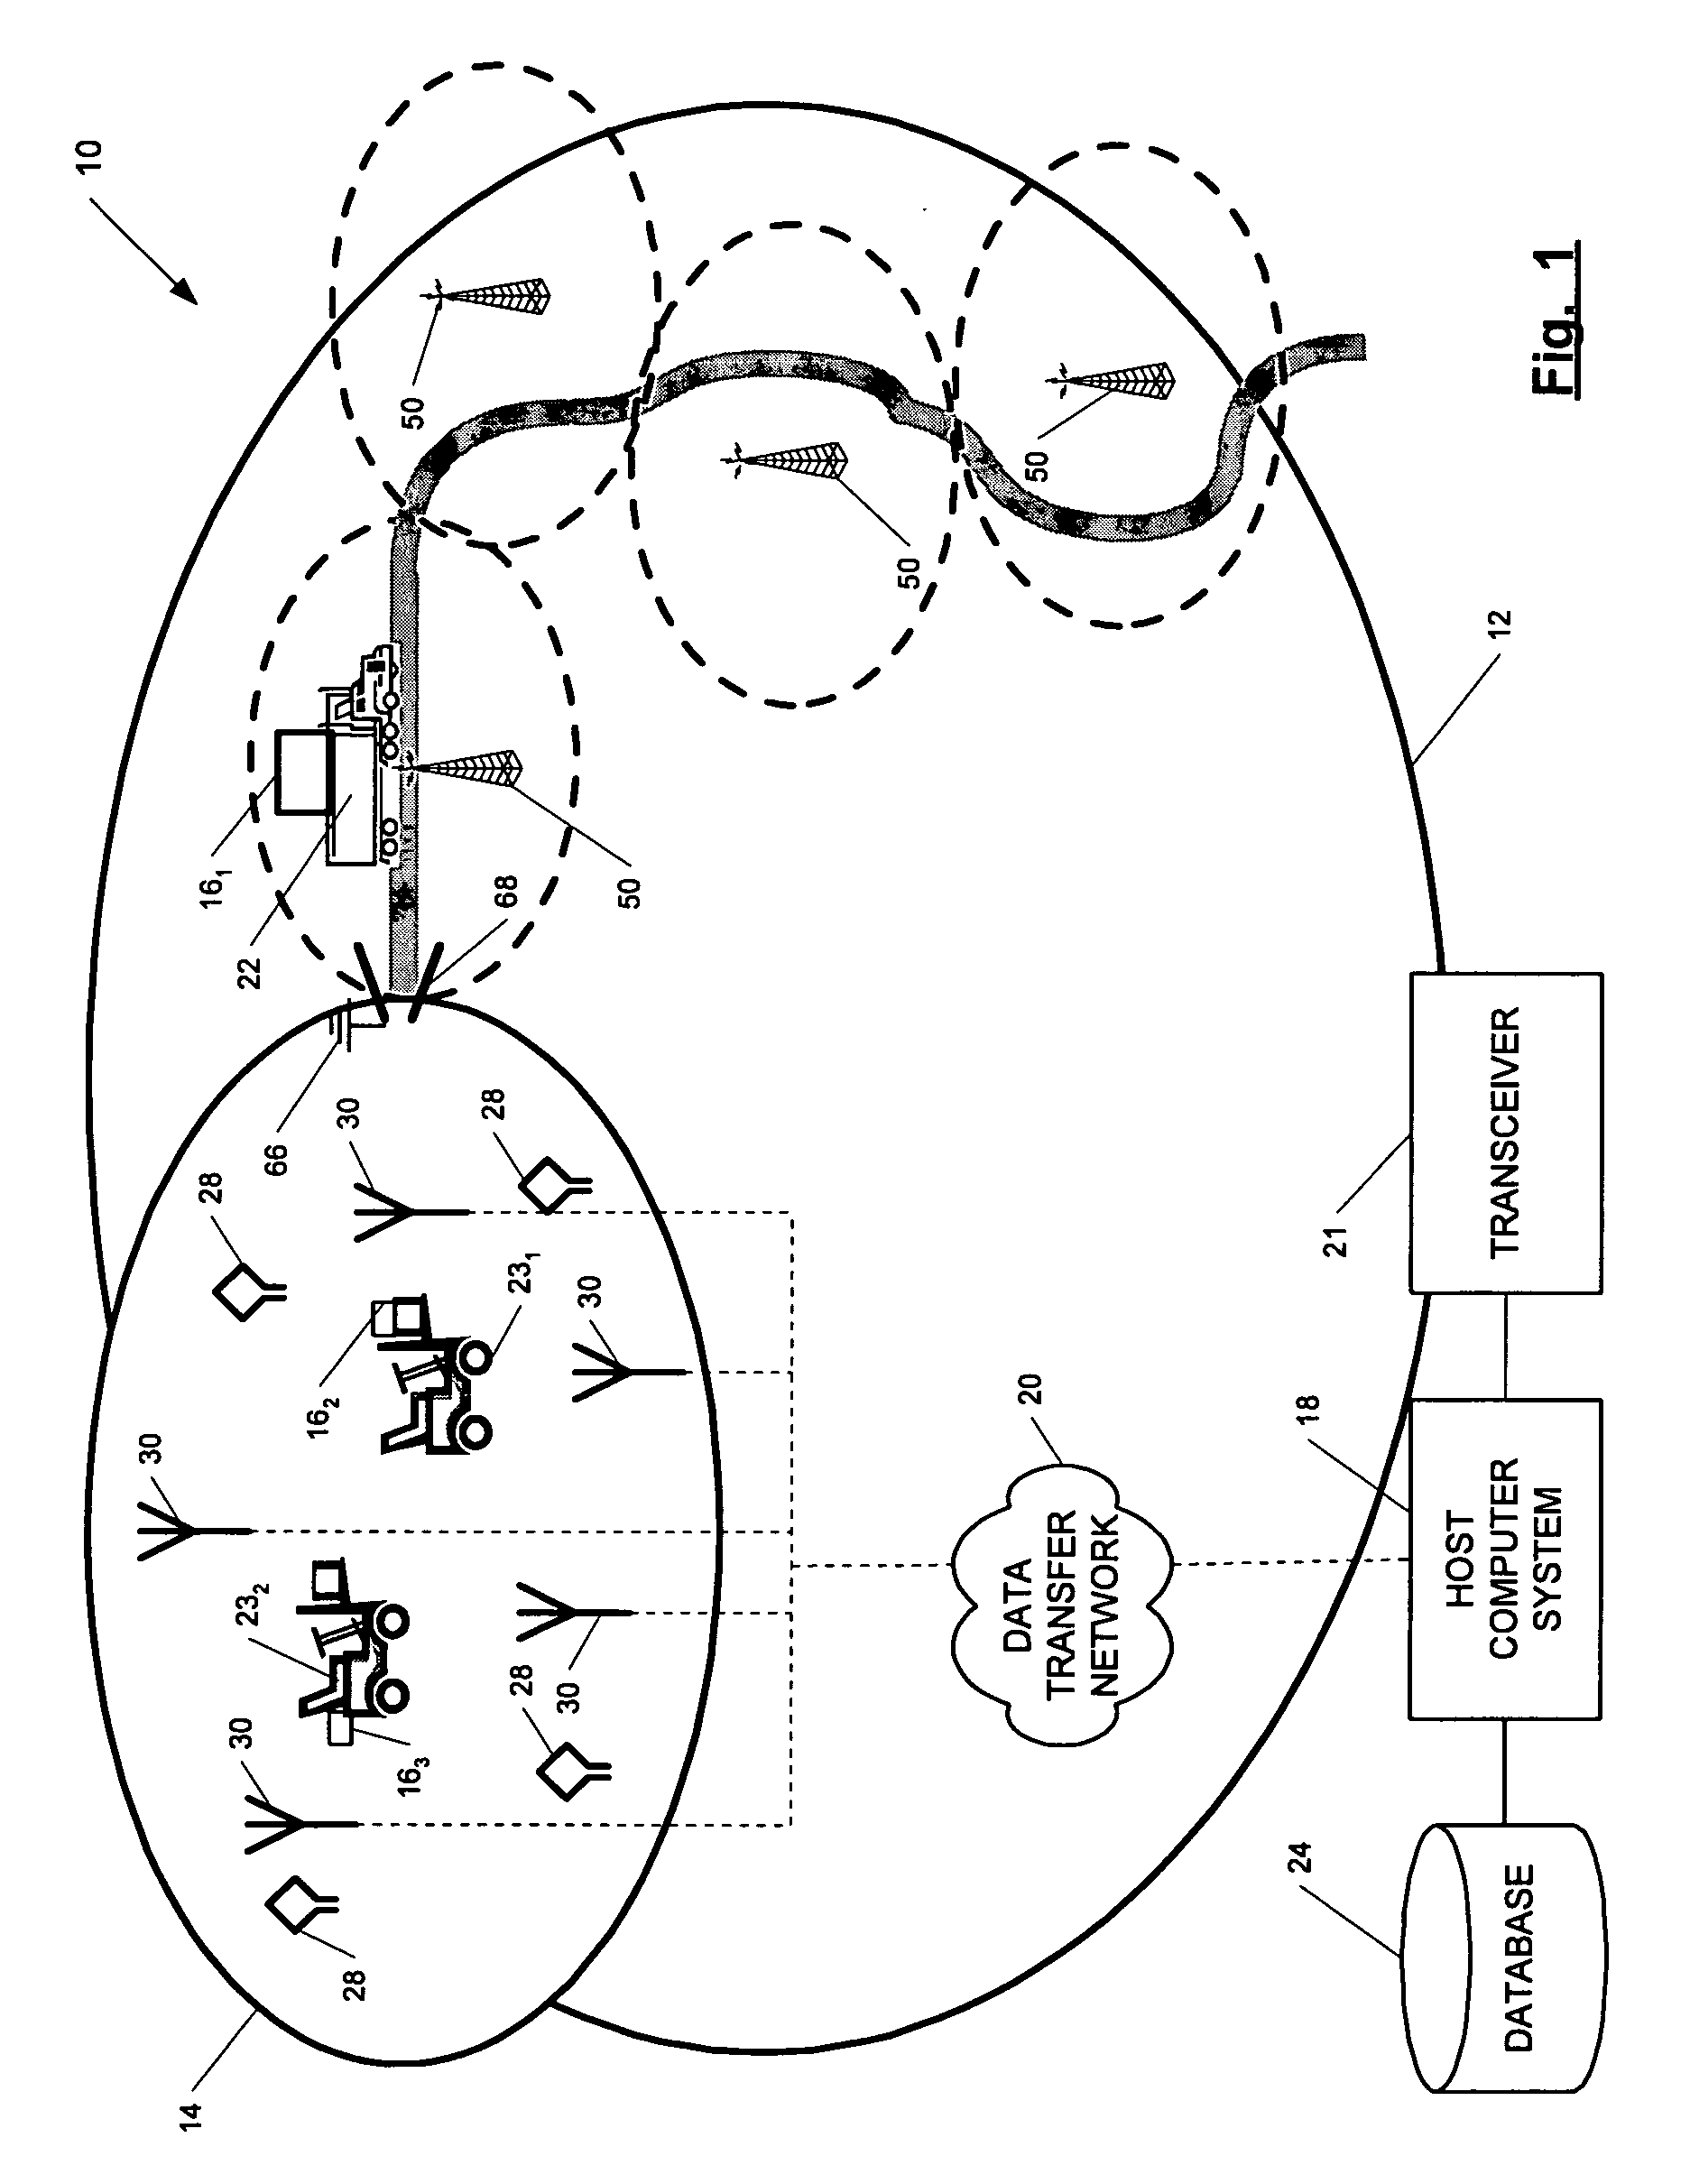 Systems and methods for determining a location of an object